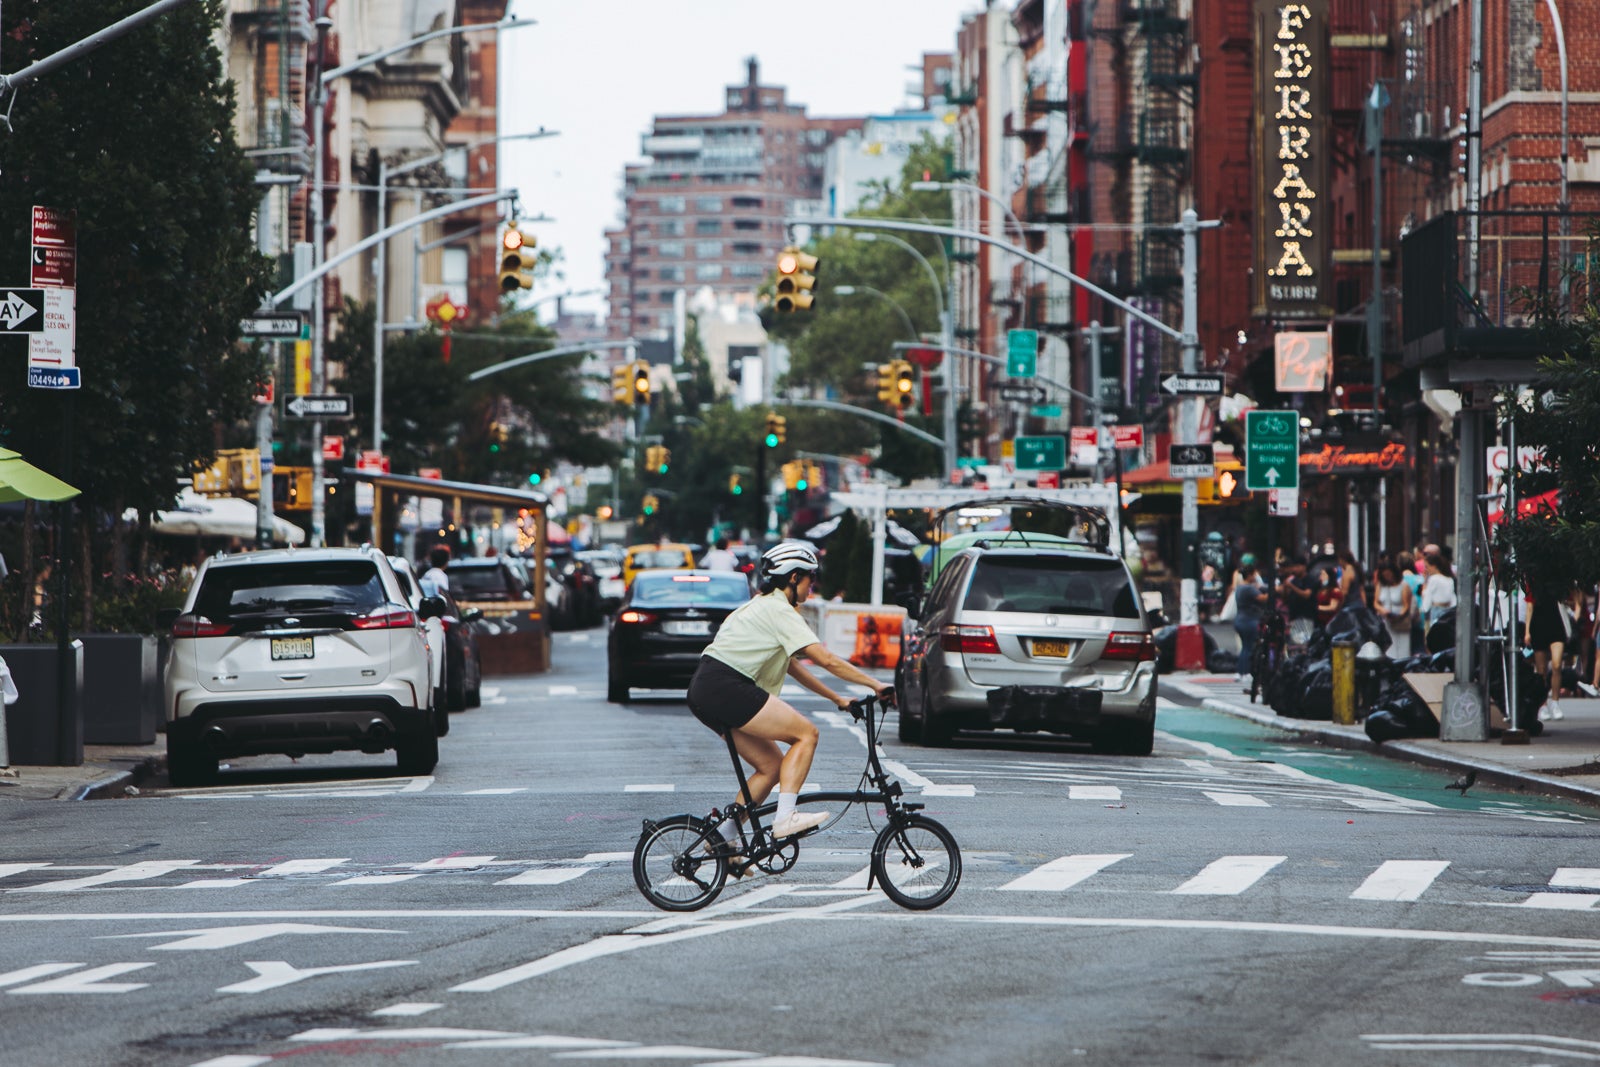 Image of person cycling Brompton bike across the road in New York City